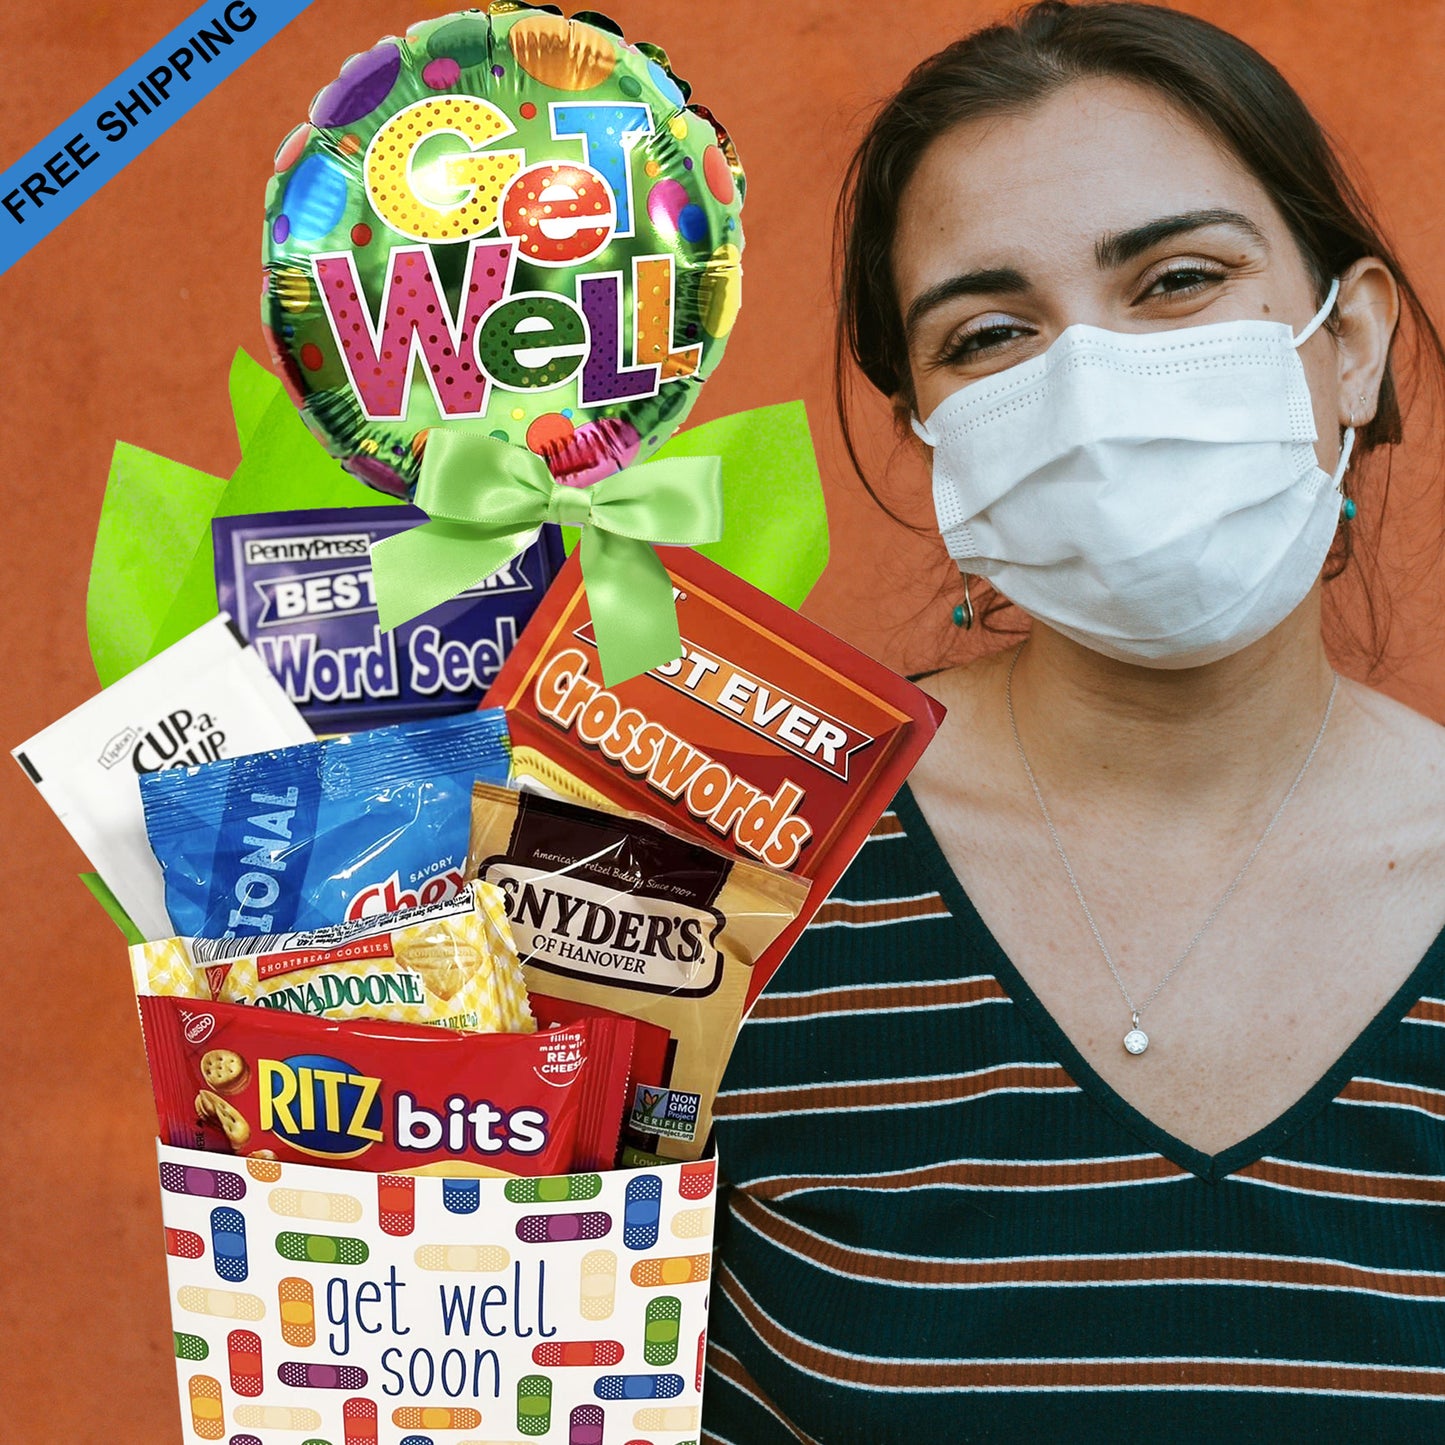 Get Well Soon Gifts for Women, Care Package Get Well Gift Basket for Sick  Friends, After Surgery Gifts, Birthday Gift Box, Thinking Of You Gifts For